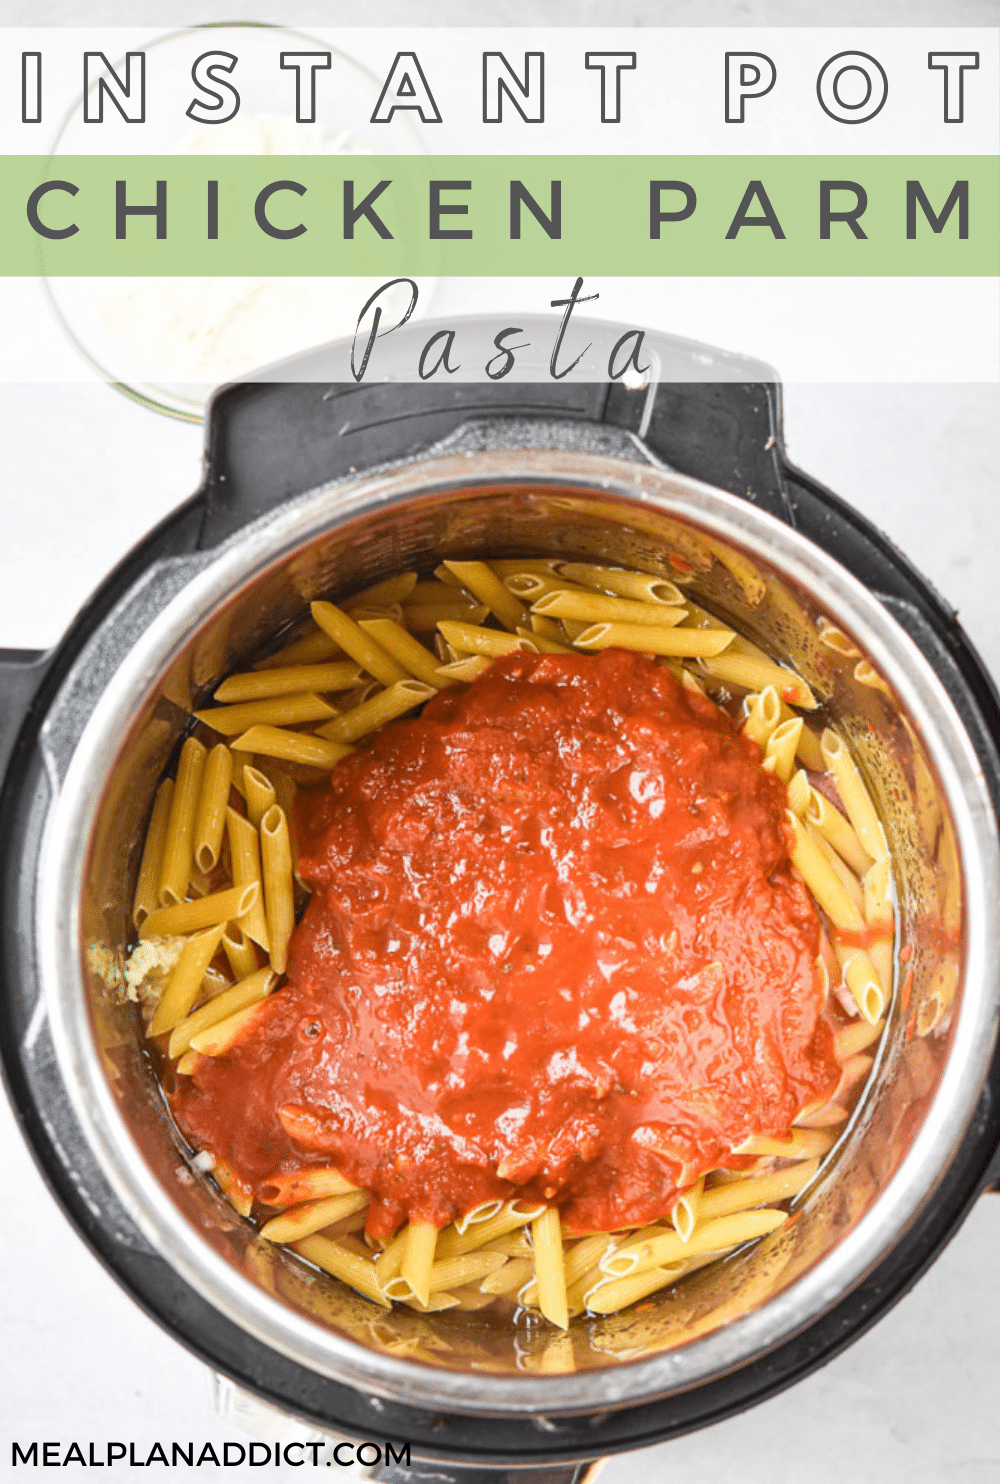 How to Make Instant Pot Chicken Parm Pasta | Meal Plan Addict